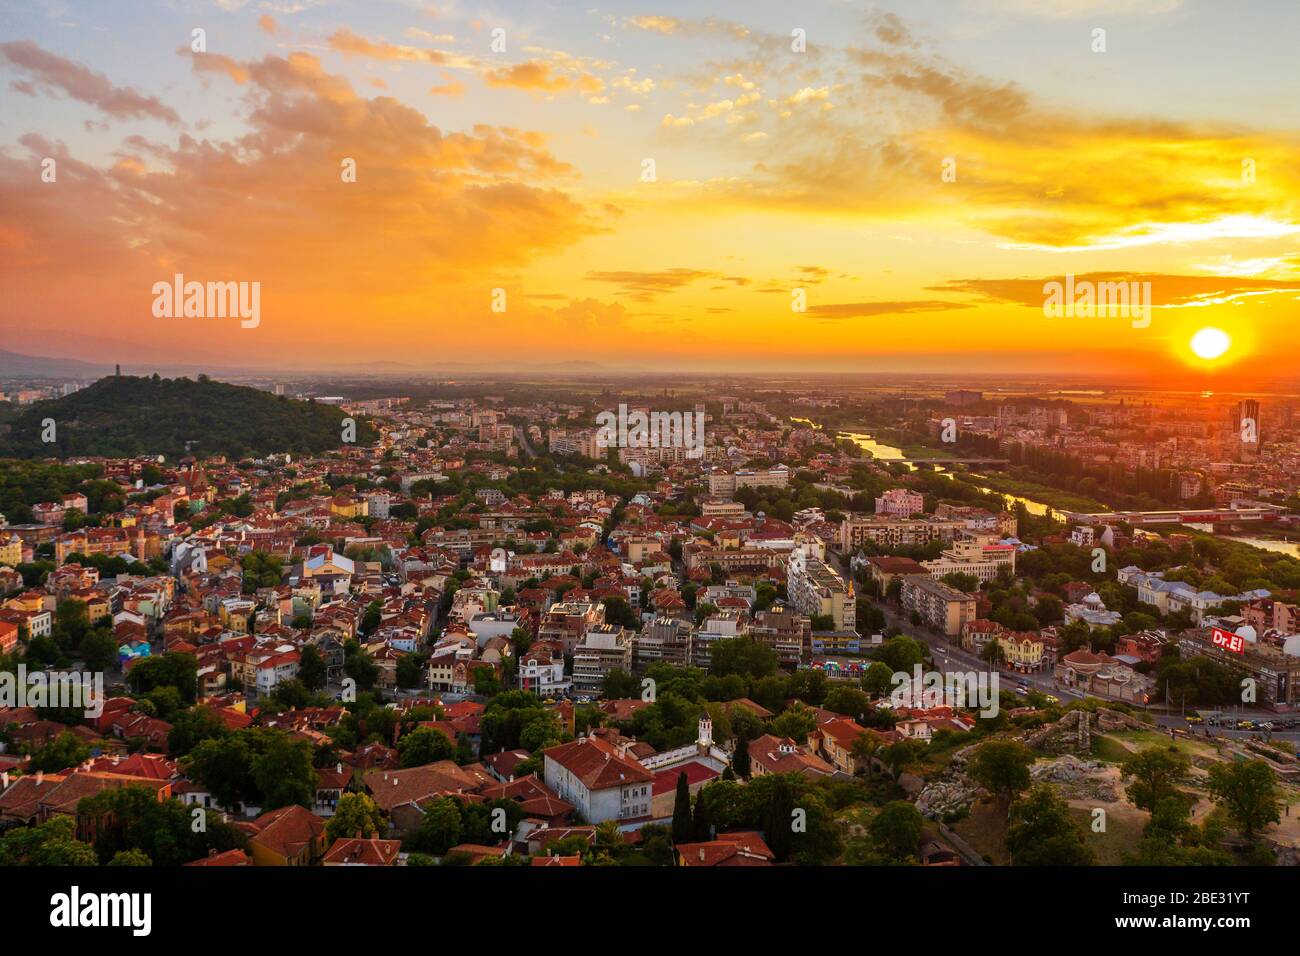 Europe, Bulgaria, aerial view of Plovdiv city center at sunrise Stock Photo